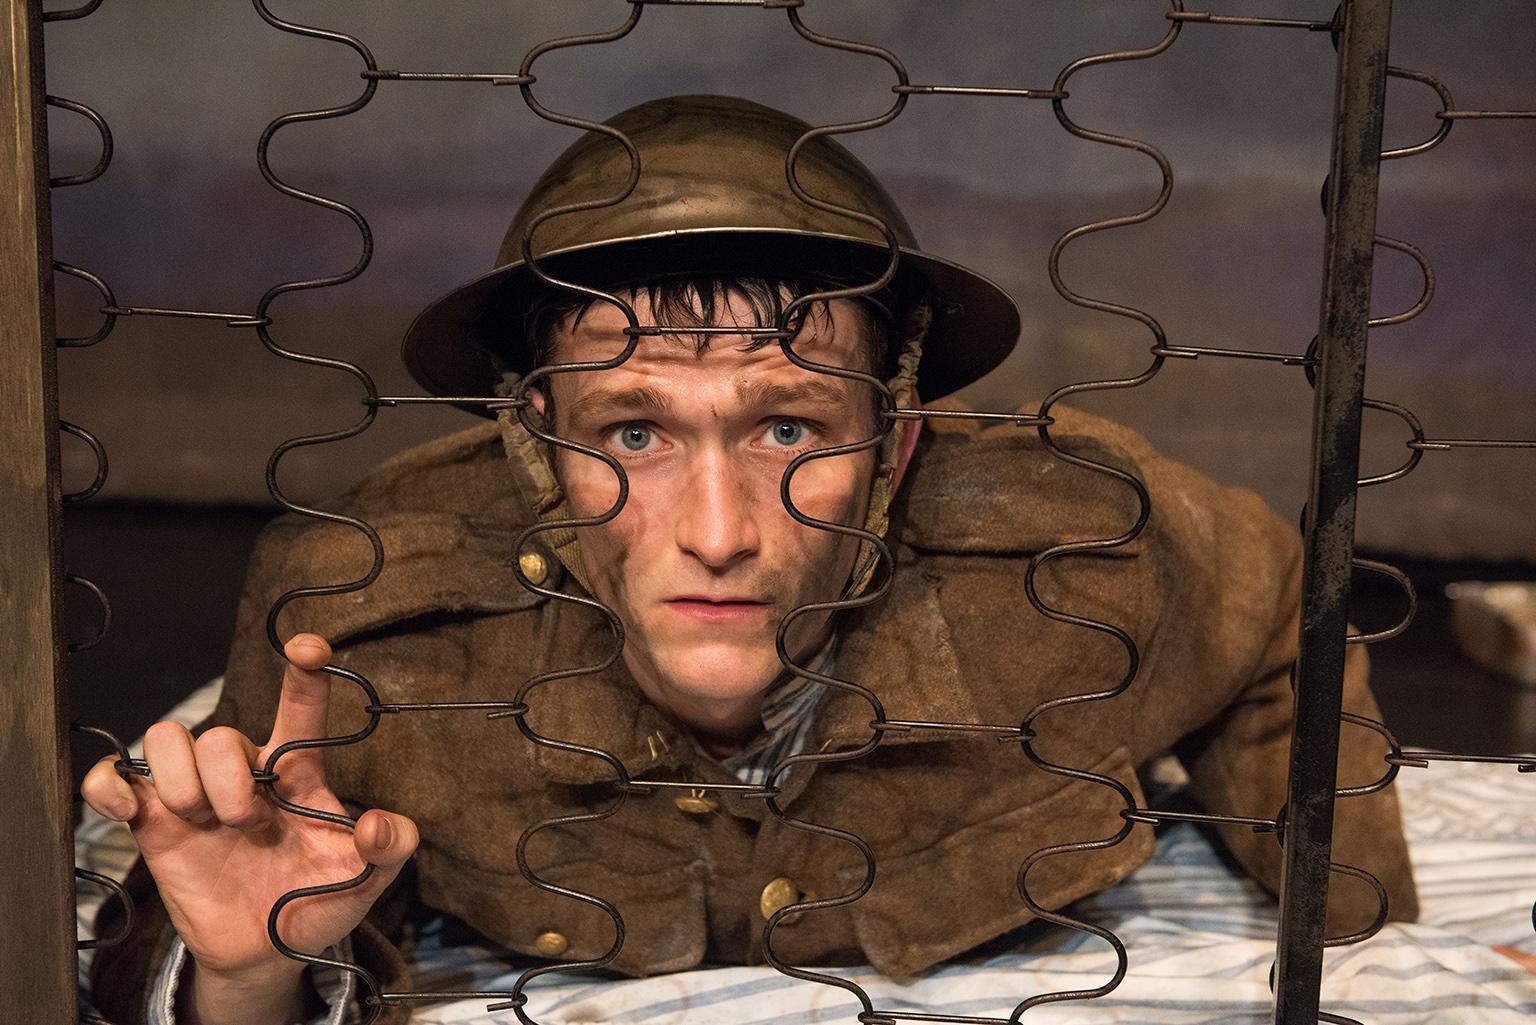 Shane O’Regan stars in the one-man show “Private Peaceful.” (Credit: Ahron R. Foster)